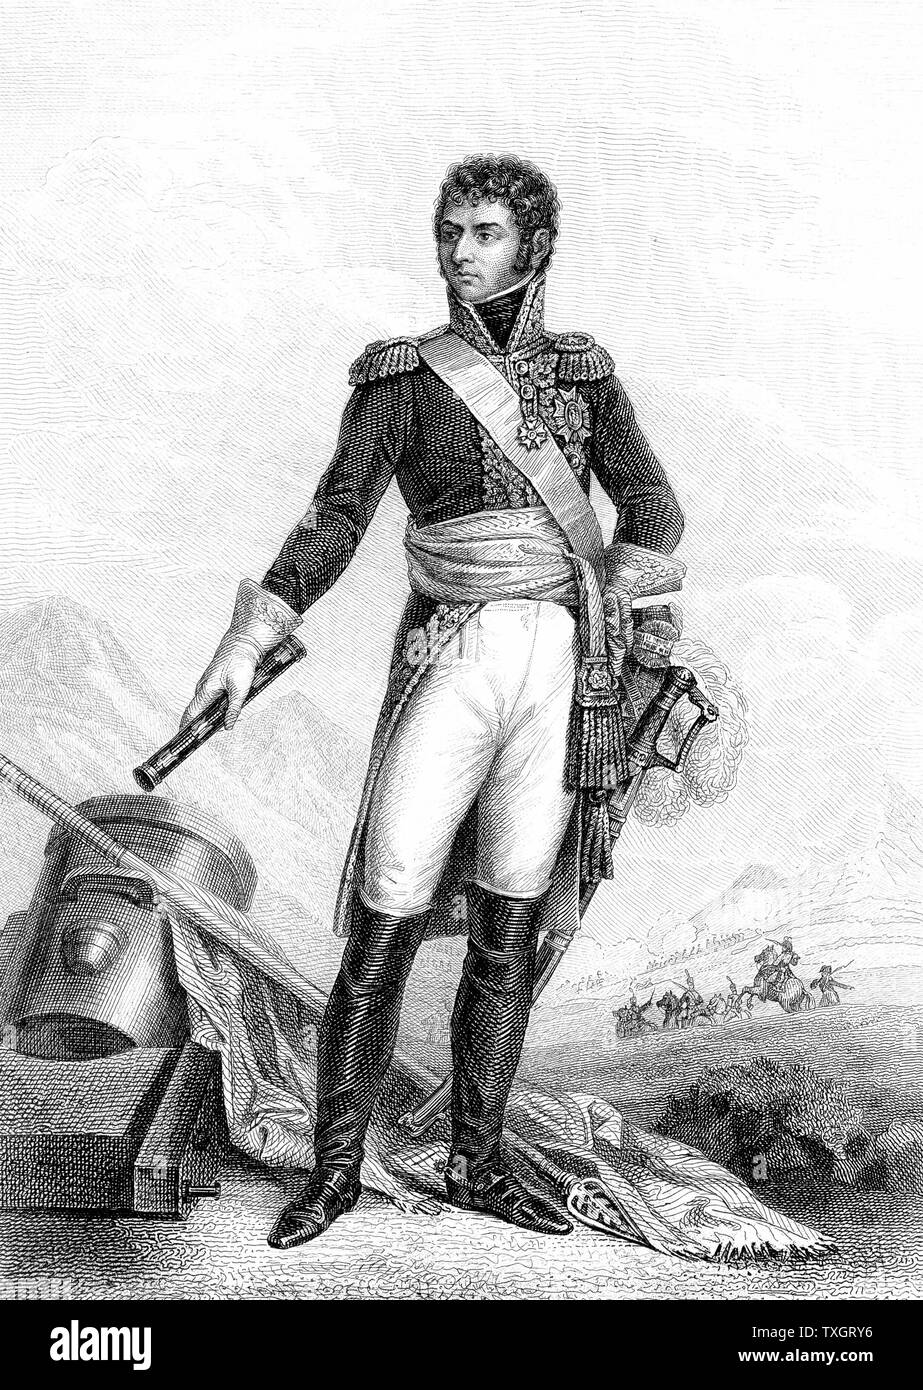 Jean Baptiste Jules Bernadotte  (1763-1844) French revolutionary soldier: Marshal of France under Napoleon: elected Crown Prince of Sweden 1810: King Charles XIV John (1818-44).  Engraving after portrait by F.J. Kinson showing him standing beside a mortar and holding Field Marshal's baton Stock Photo